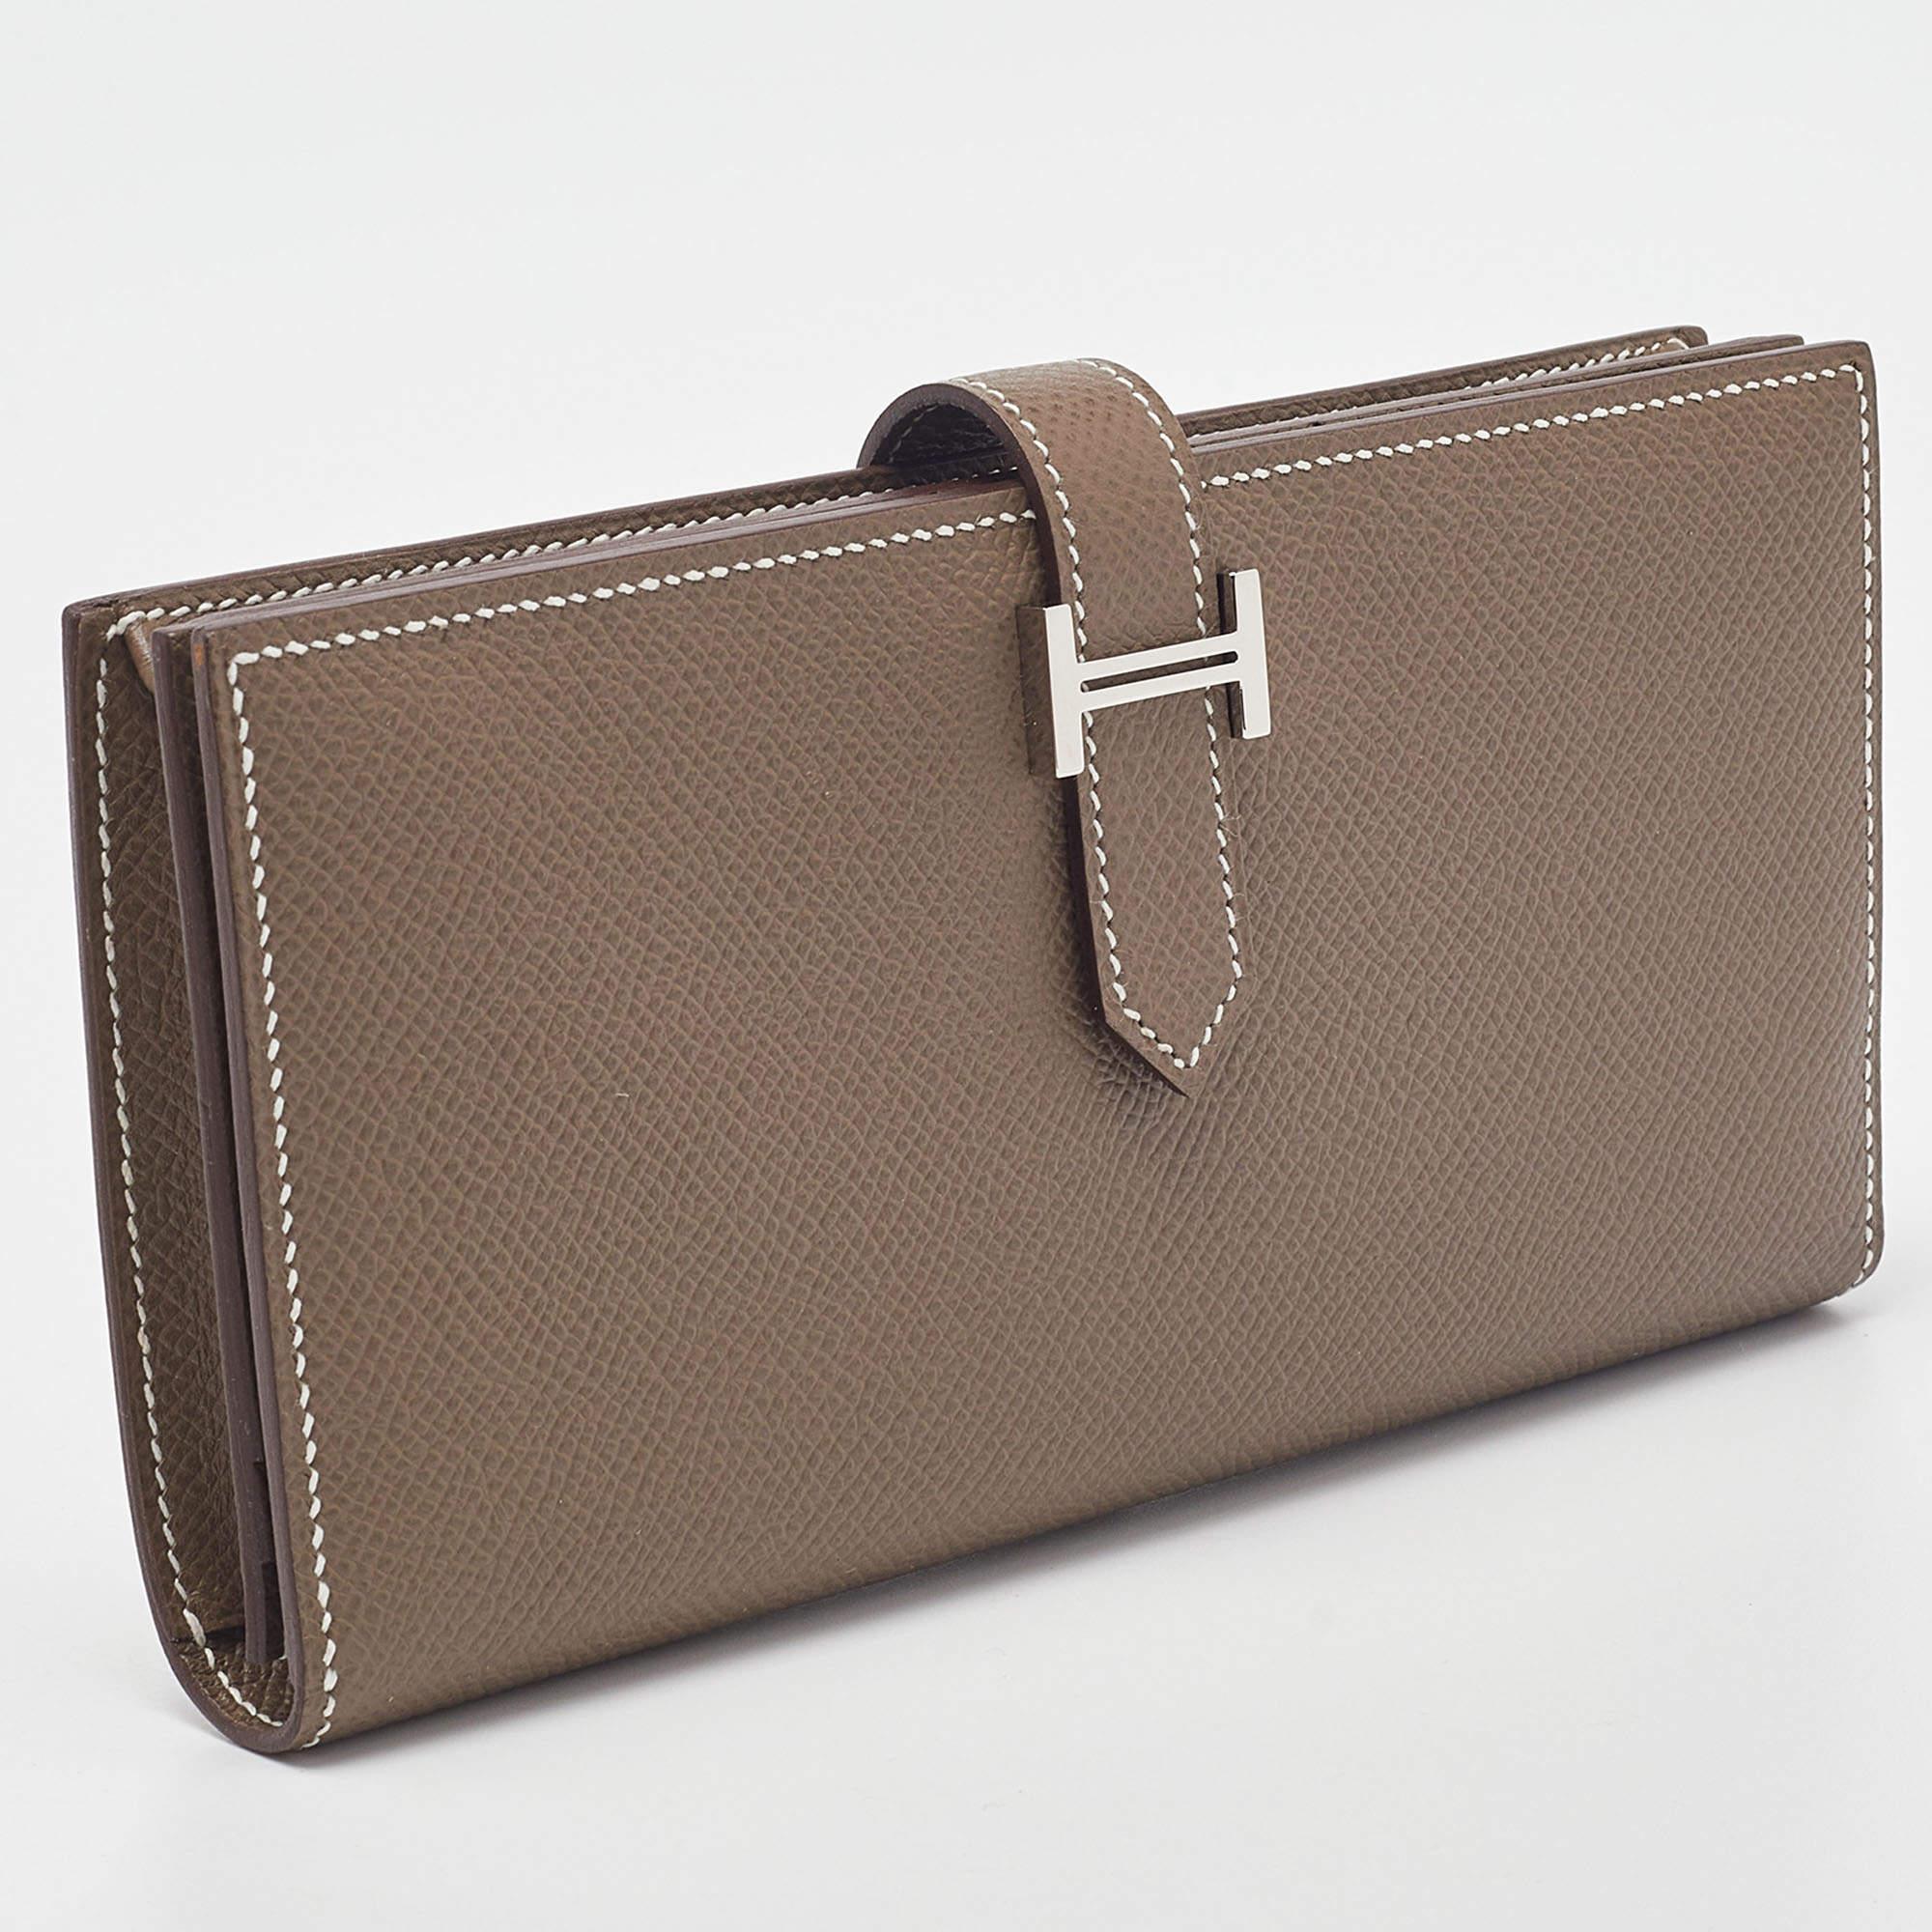 The Hermès Bearn wallet showcases exquisite craftsmanship. The supple Epsom leather in a sophisticated taupe hue is complemented by a sleek palladium-finished H logo closure. Inside, well-organized compartments and card slots offer both style and